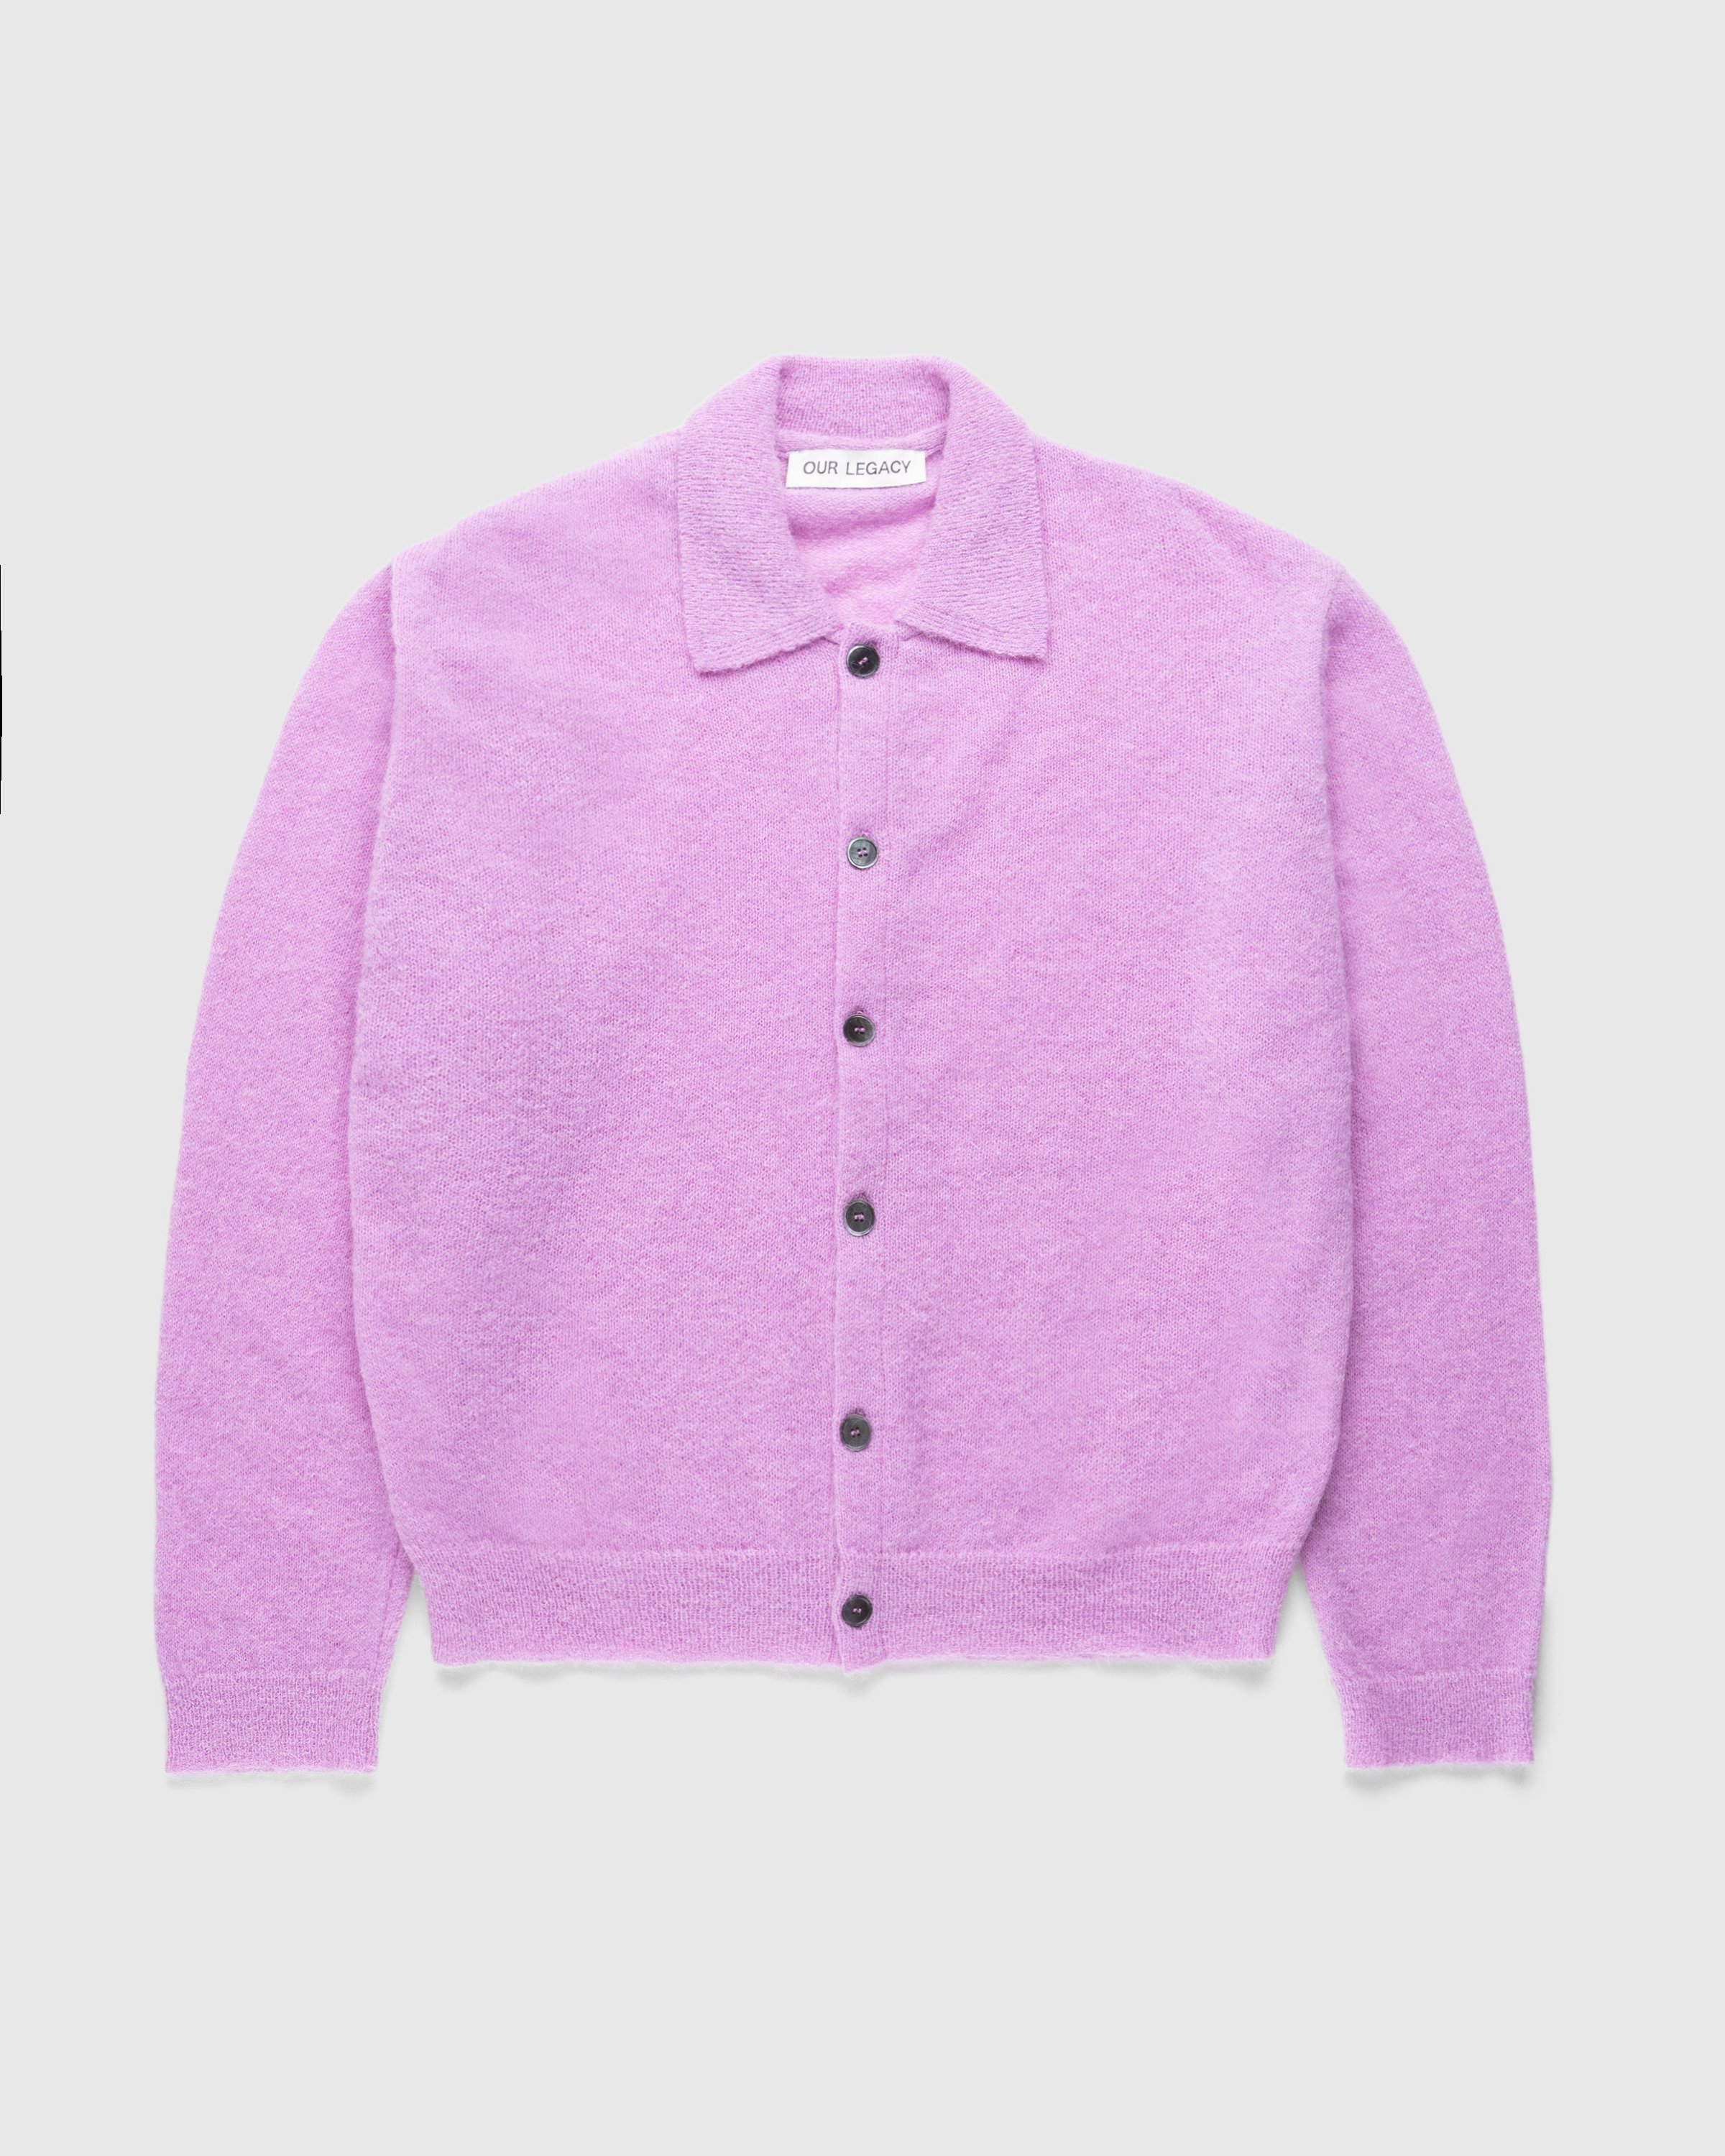 Our Legacy - Evening Polo Candyfloss Fuzzy Alpaca - Clothing - Pink - Image 1